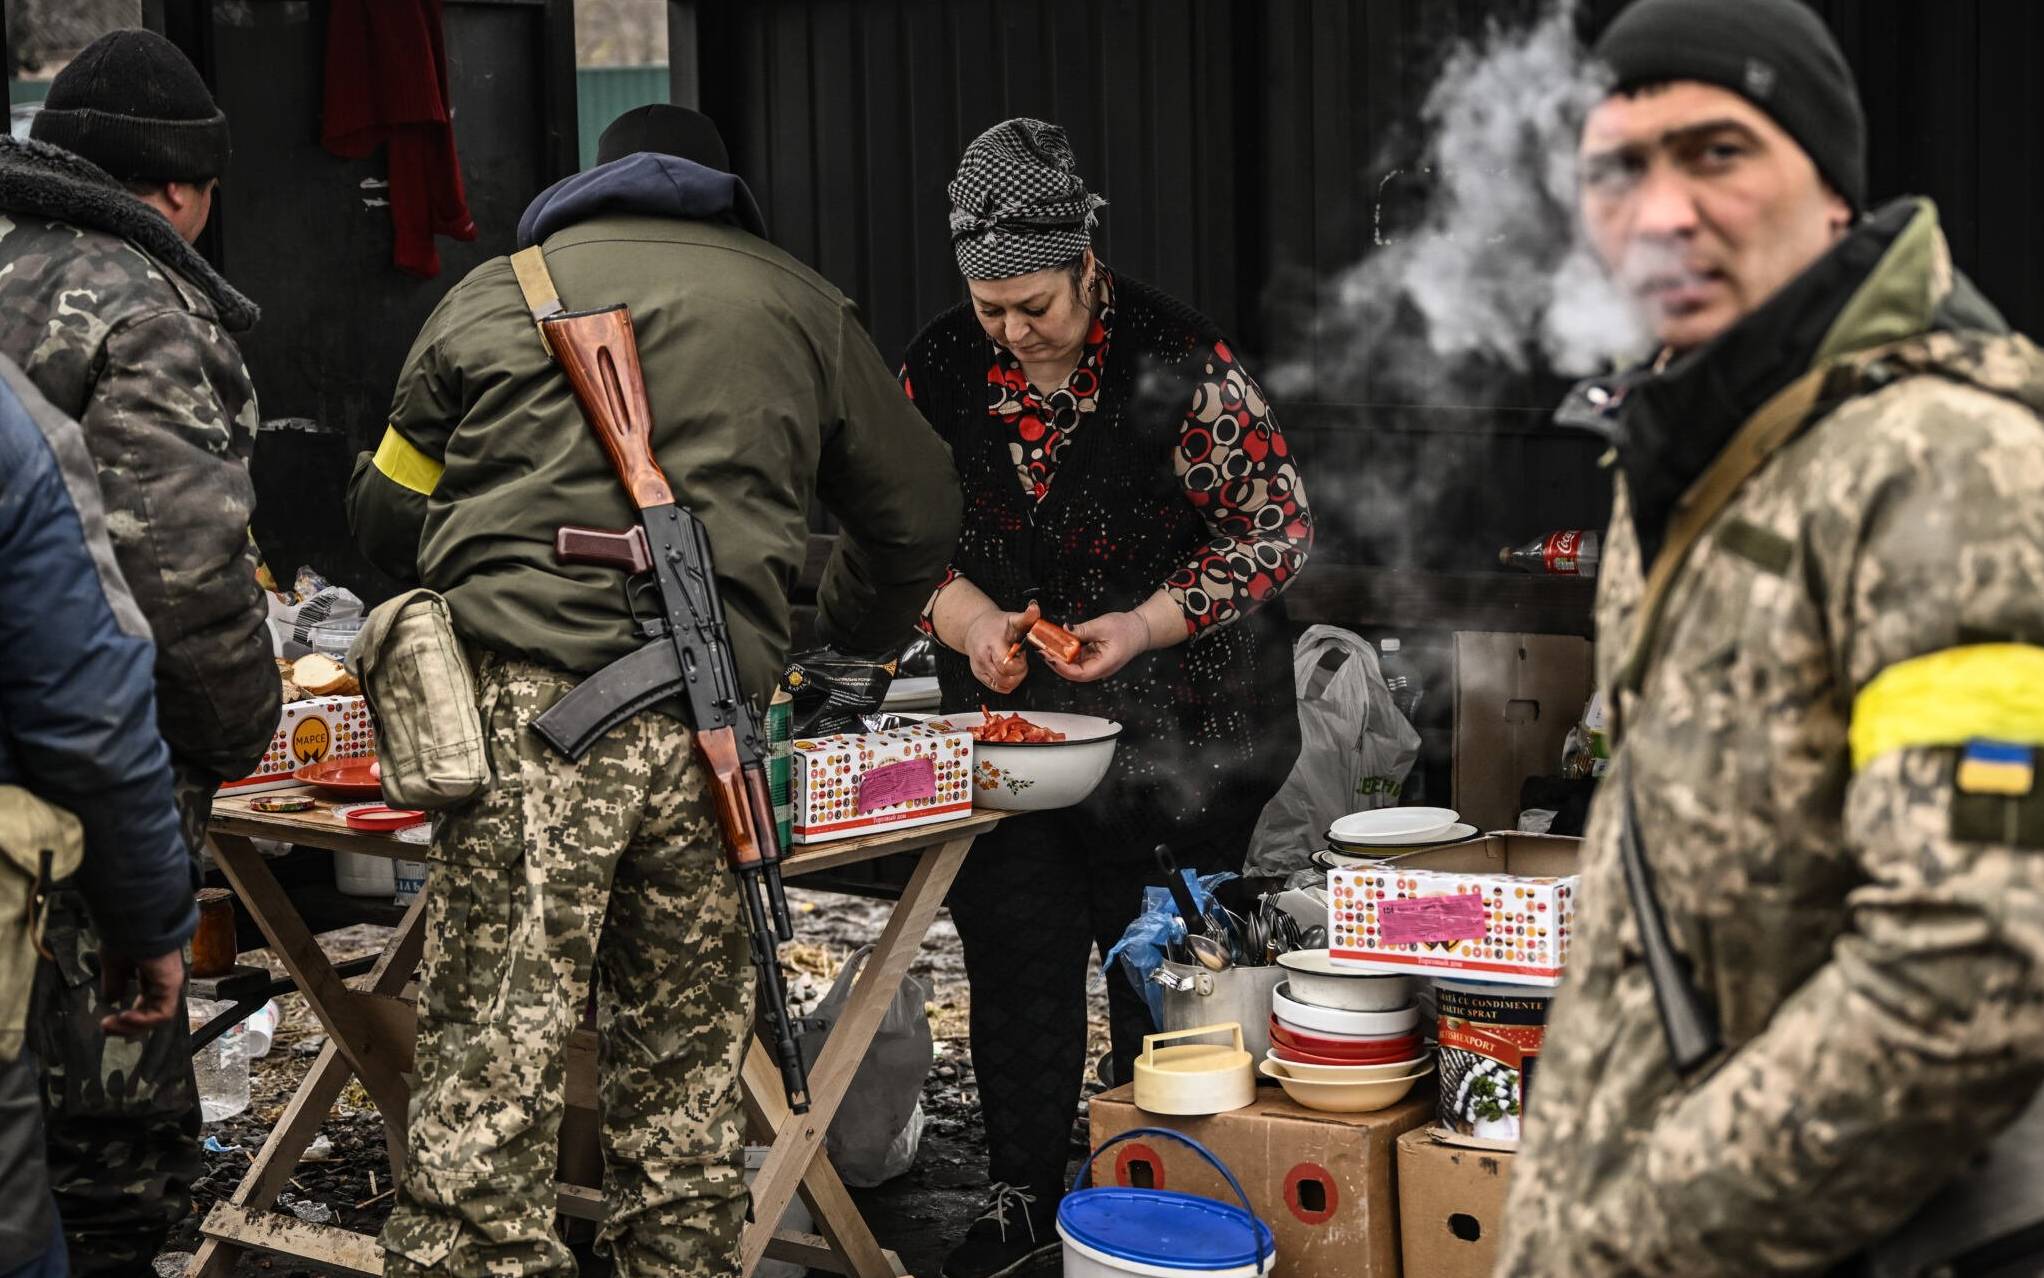 A woman cooks for Ukrainian soldiers at a frontline, northeast of Kyiv on March 3, 2022. - A Ukrainian negotiator headed for ceasefire talks with Russia said on March 3, 2022, that his objective was securing humanitarian corridors, as Russian troops advance one week into their invasion  of the Ukraine. (Photo by Aris Messinis / AFP)